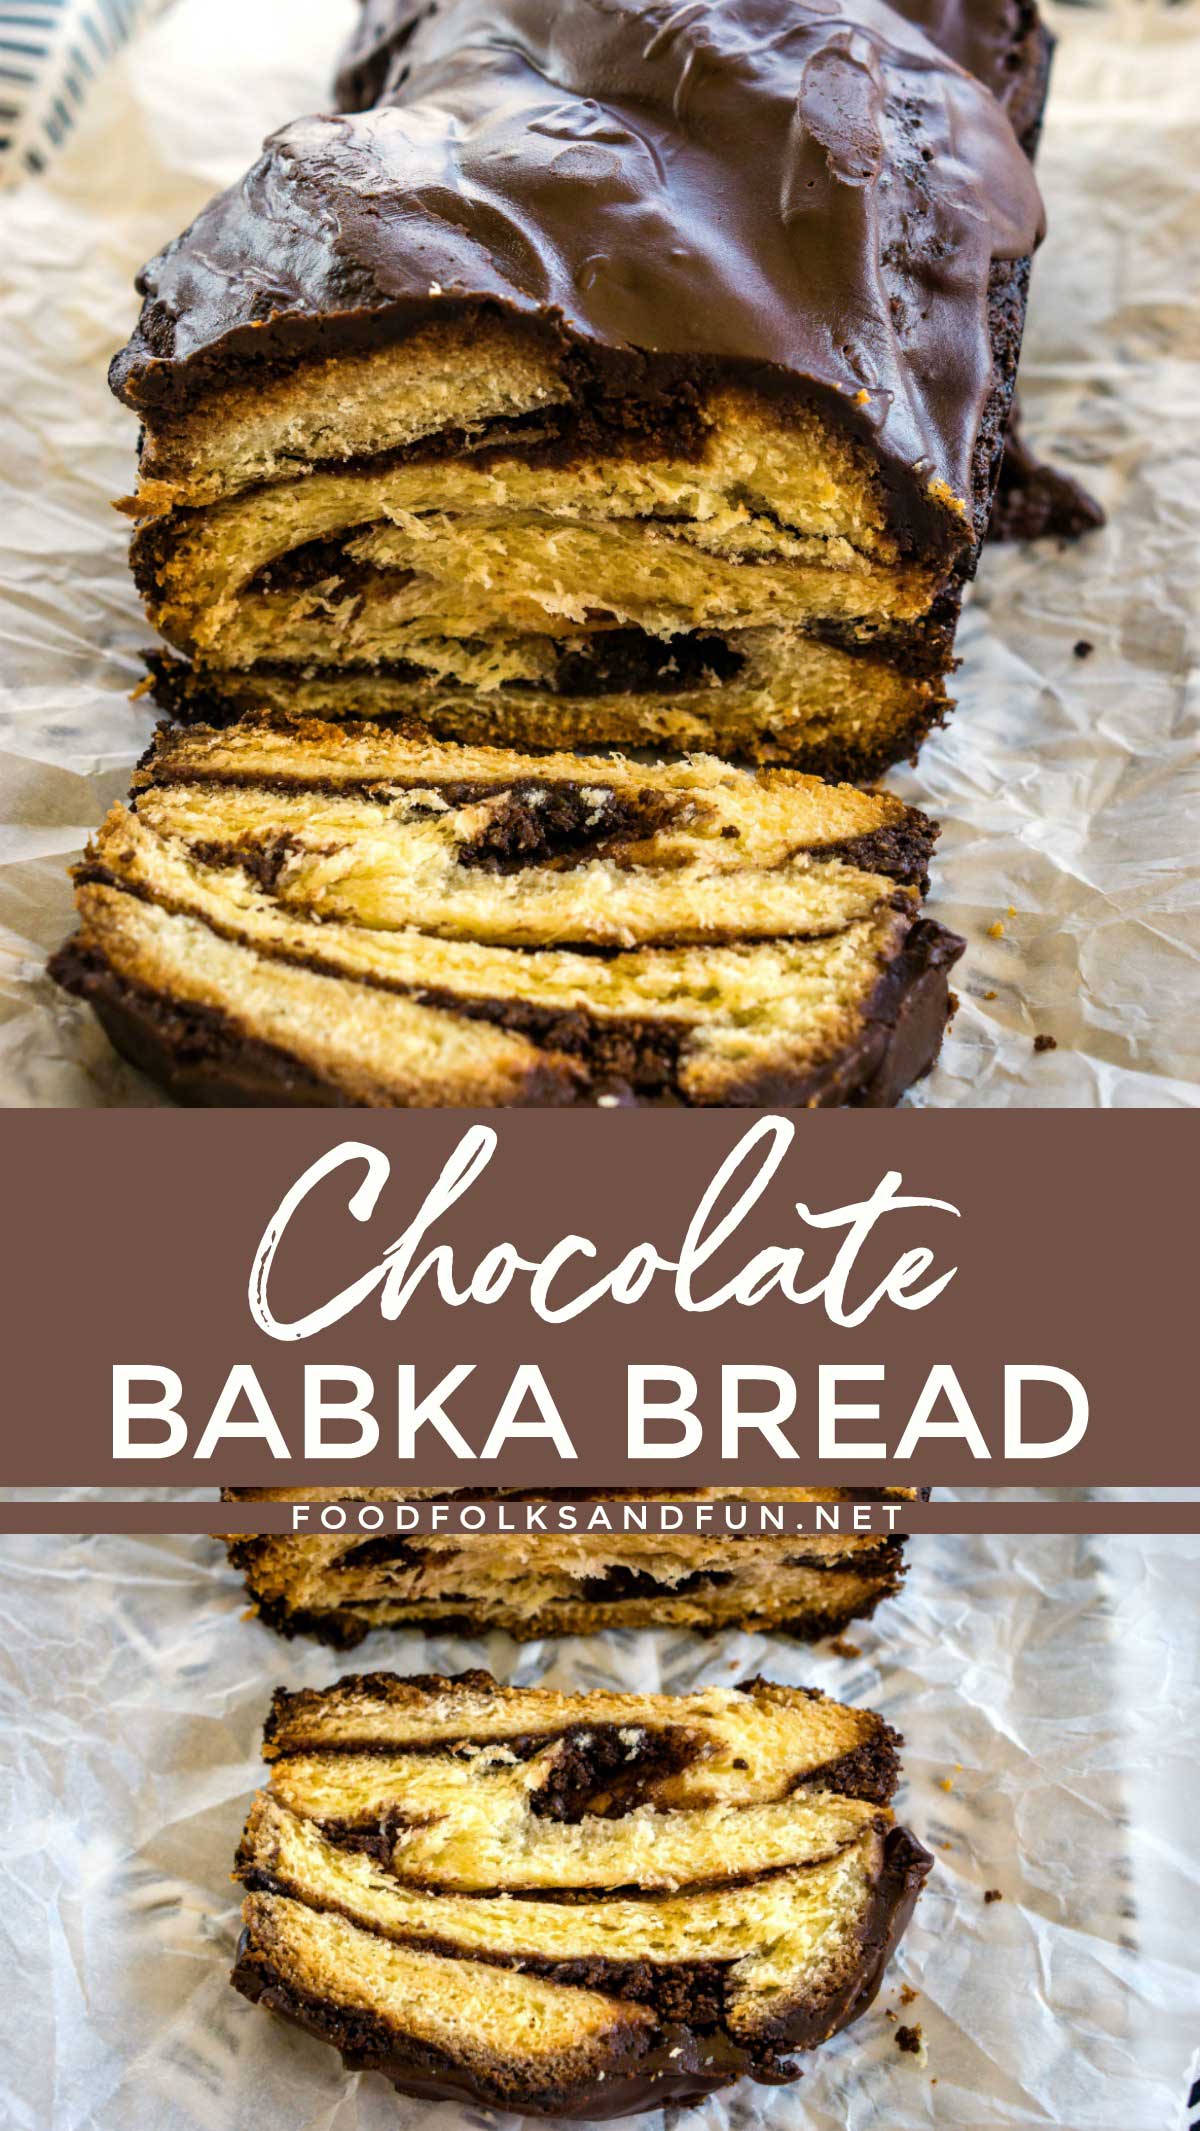 Chocolate Babka Bread with a slice cut from it and text overlay for Pinterest